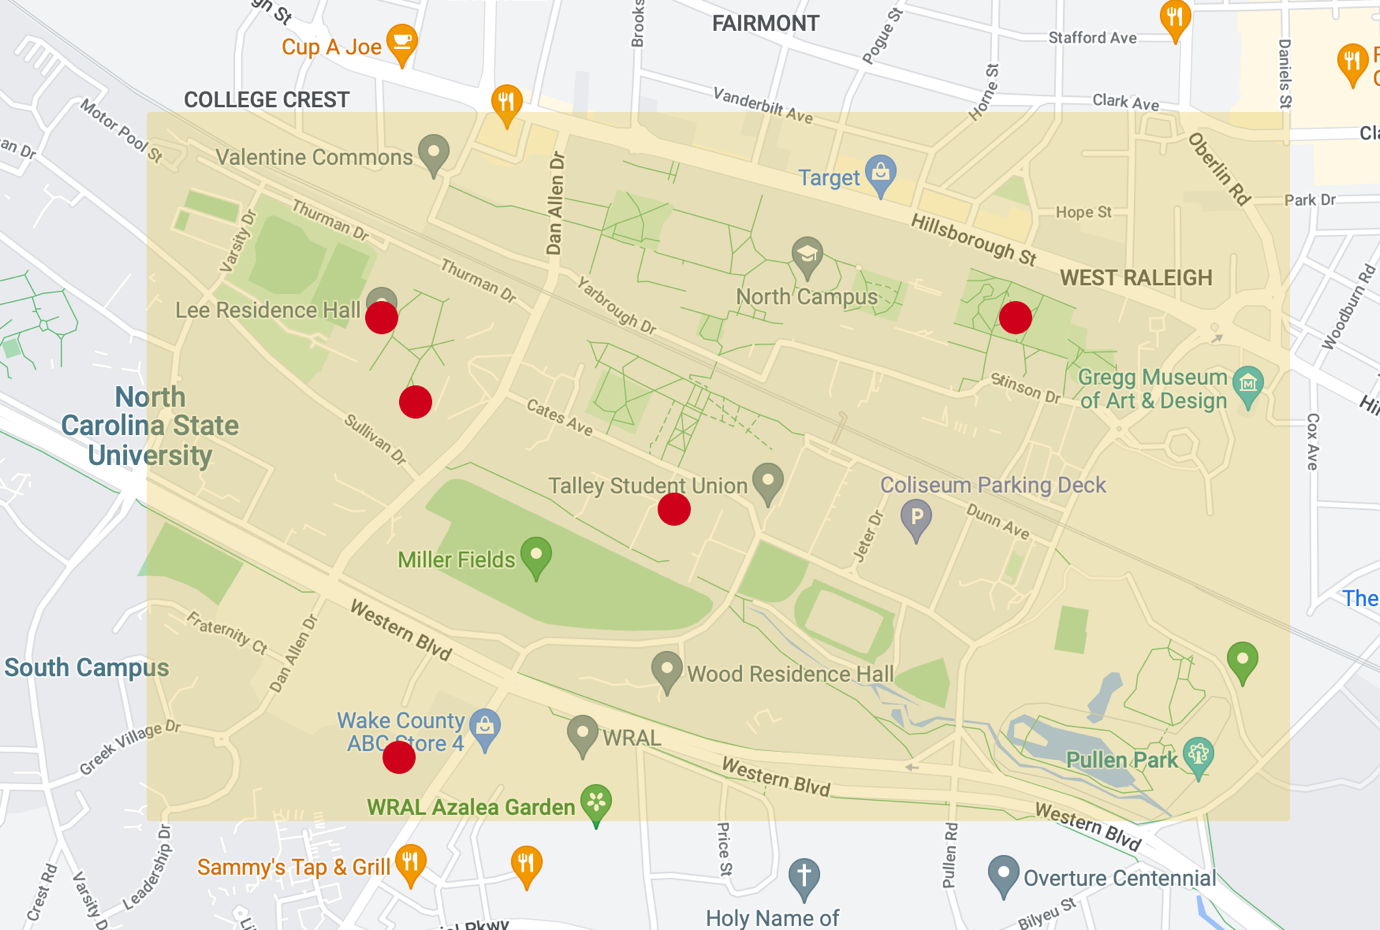 The red dots show the five central locations for field data collection